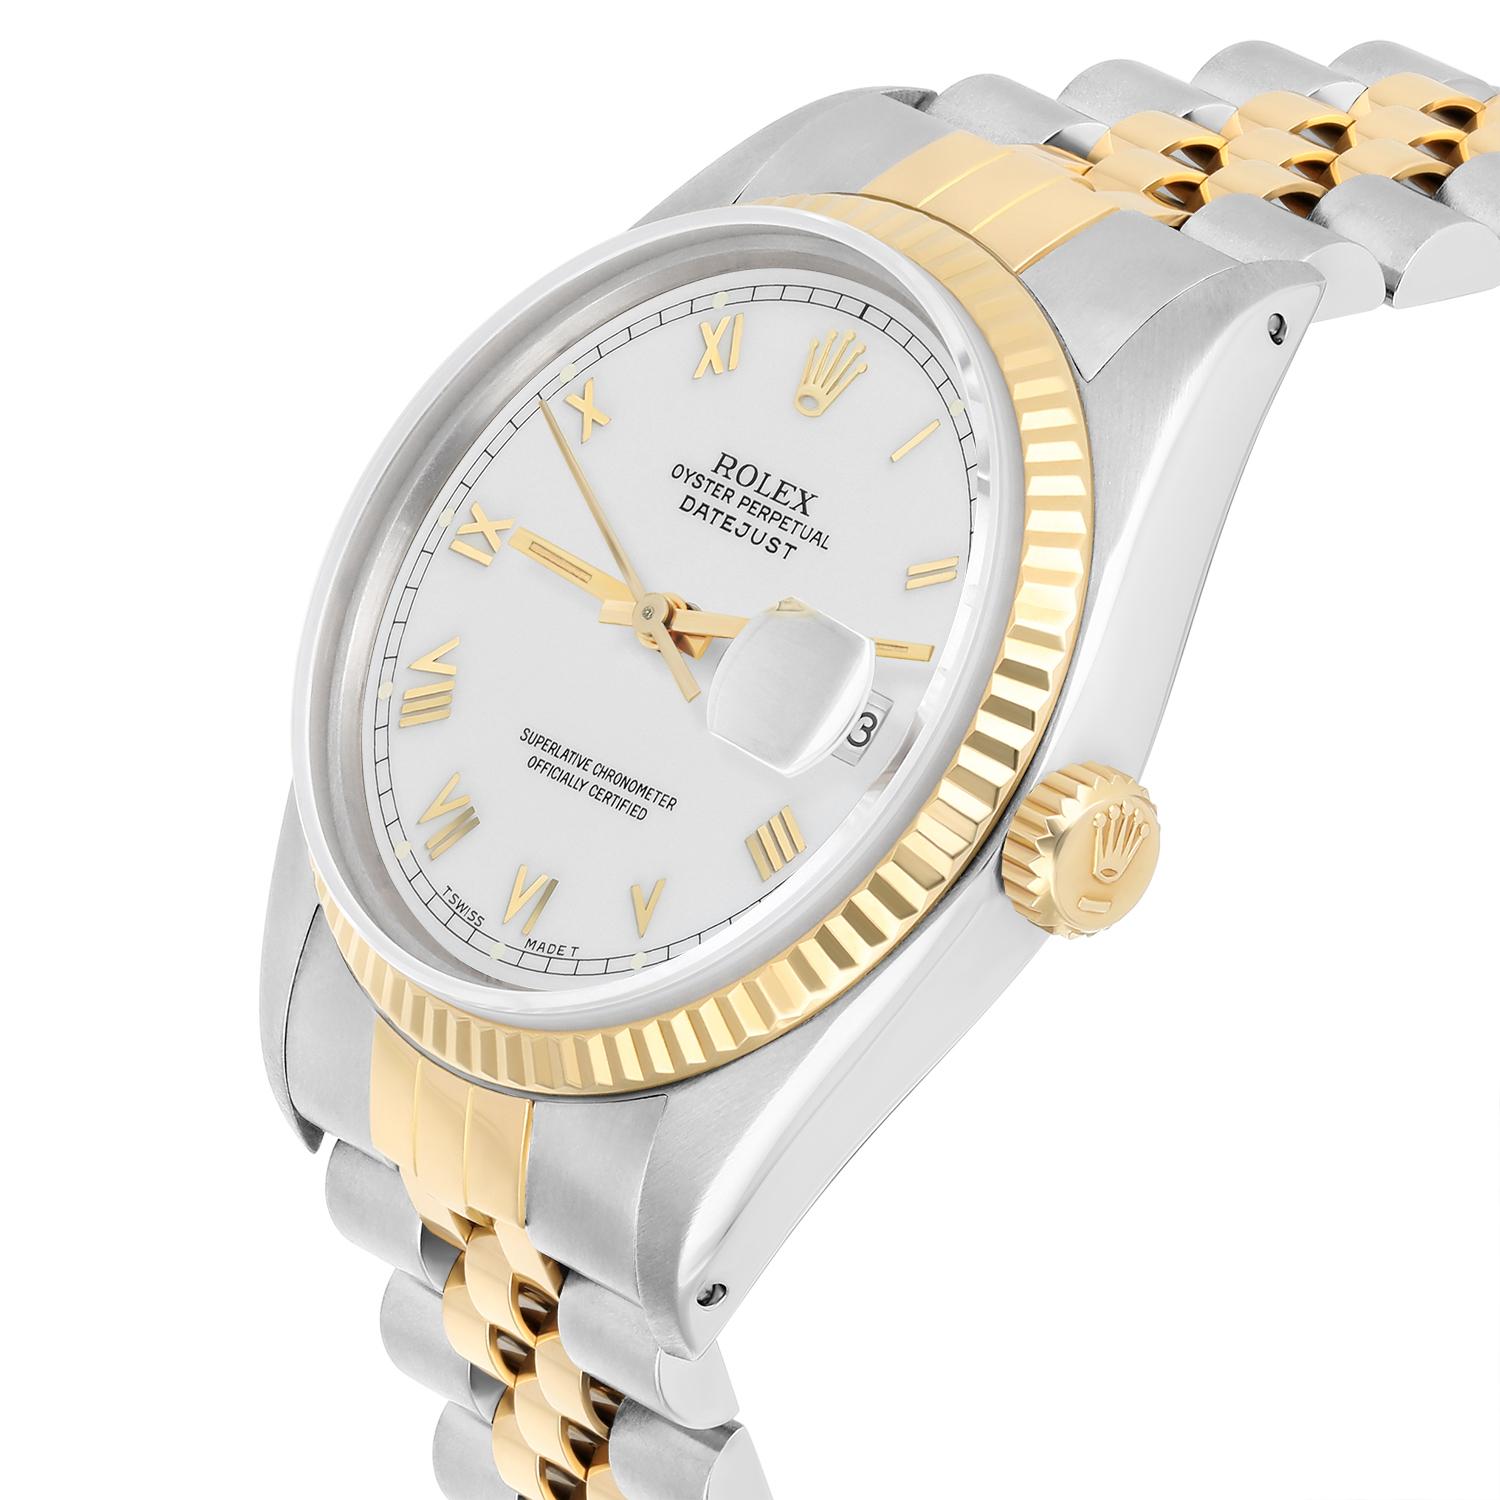 Rolex Datejust 36mm Two Tone White Roman Numeral Dial Jubilee 16013 Circa 1987 In Excellent Condition For Sale In New York, NY